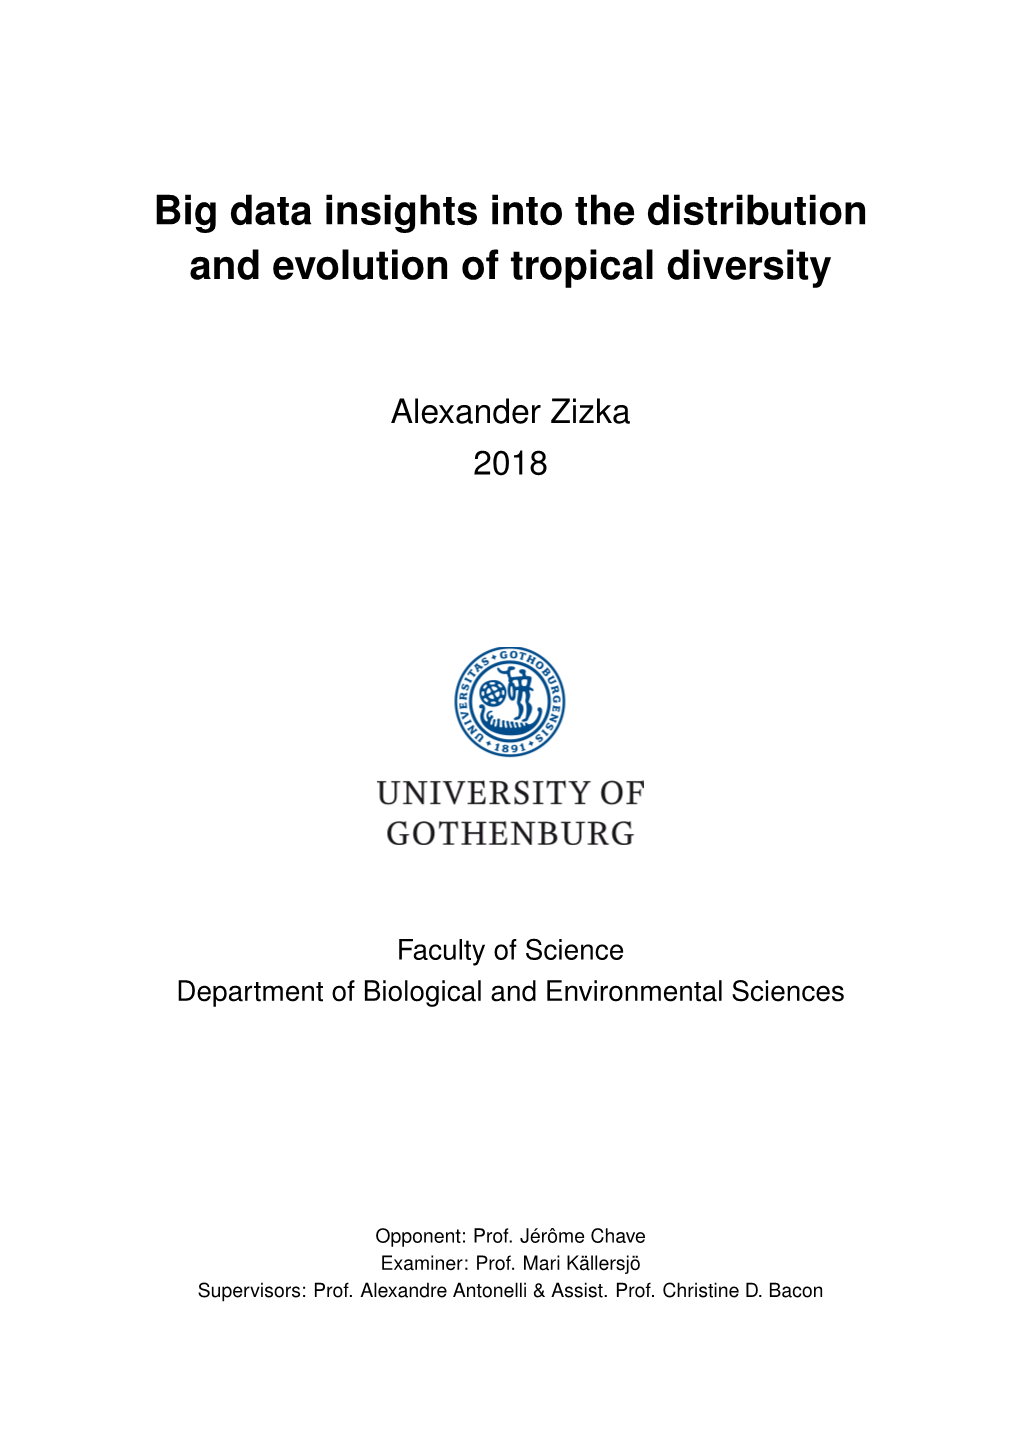 Big Data Insights Into the Distribution and Evolution of Tropical Diversity